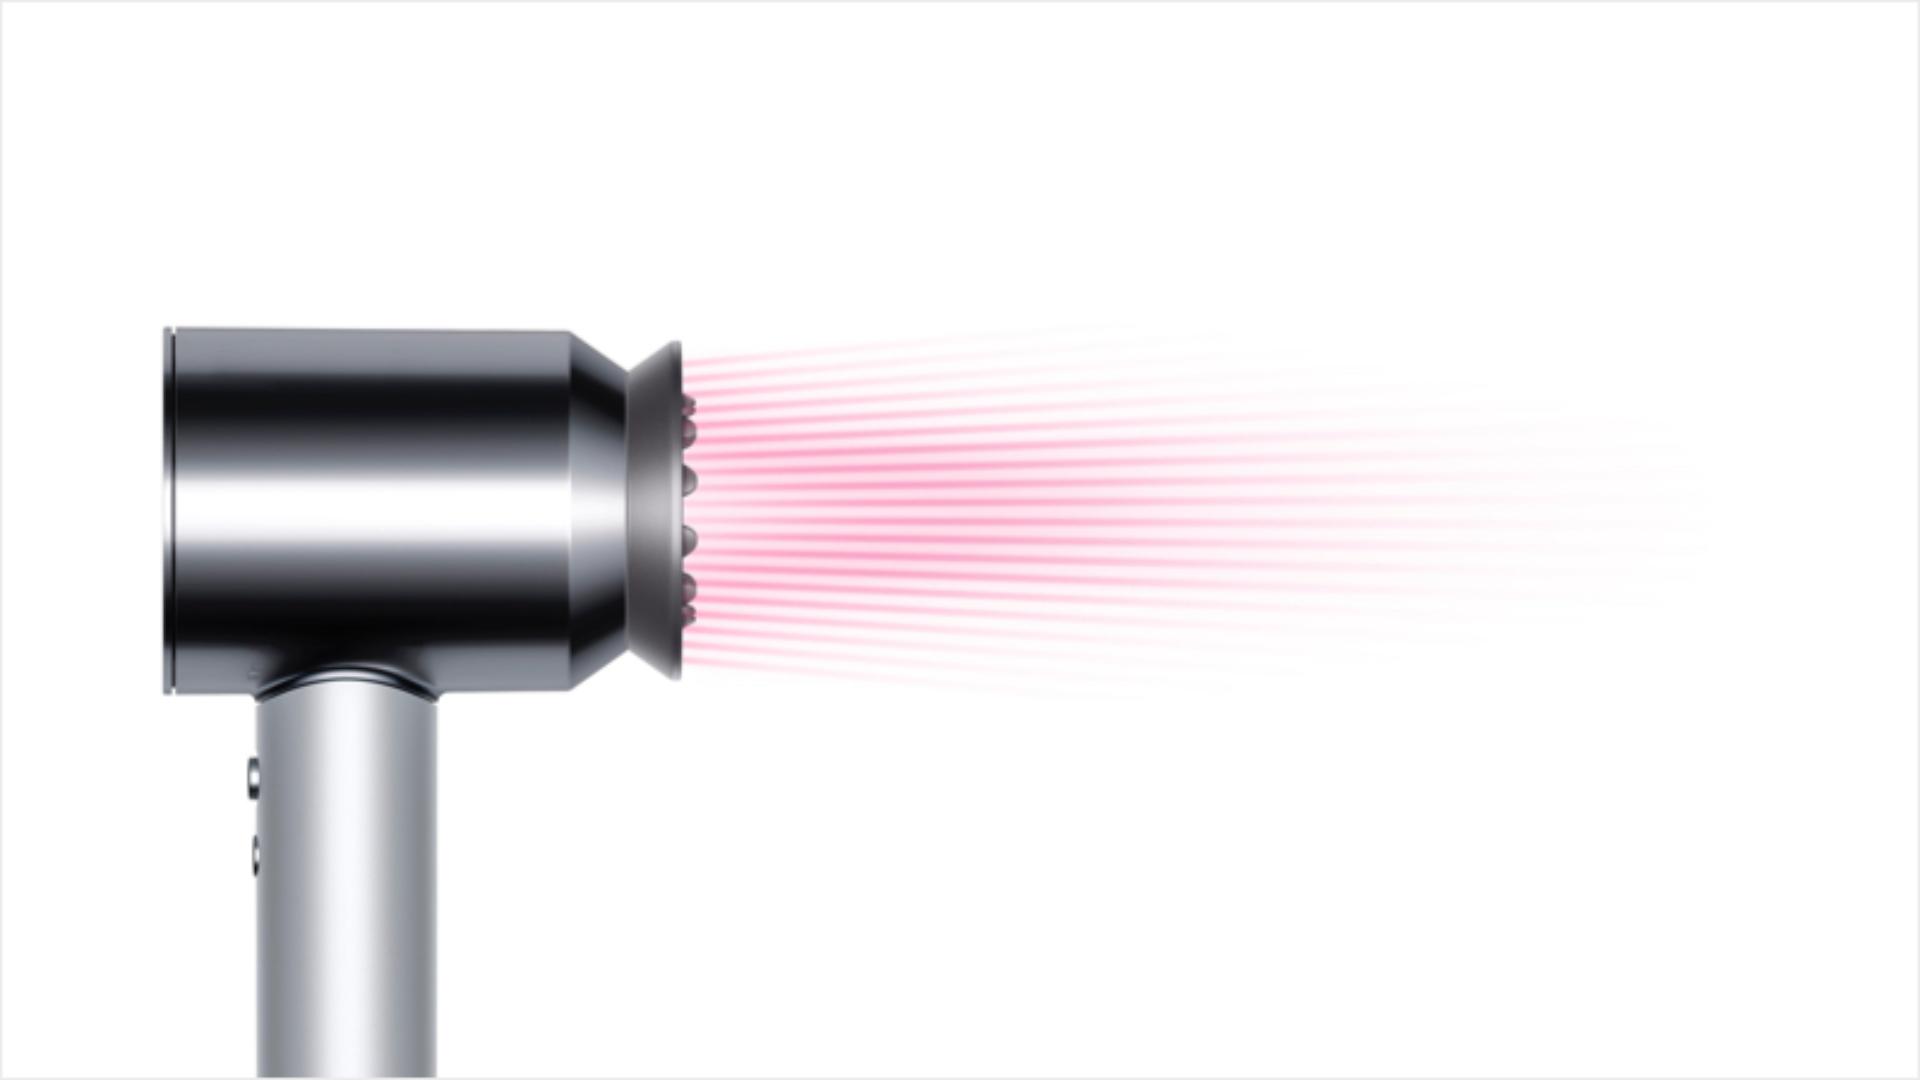 Gentle air attachment for the Dyson Supersonic hair dryer